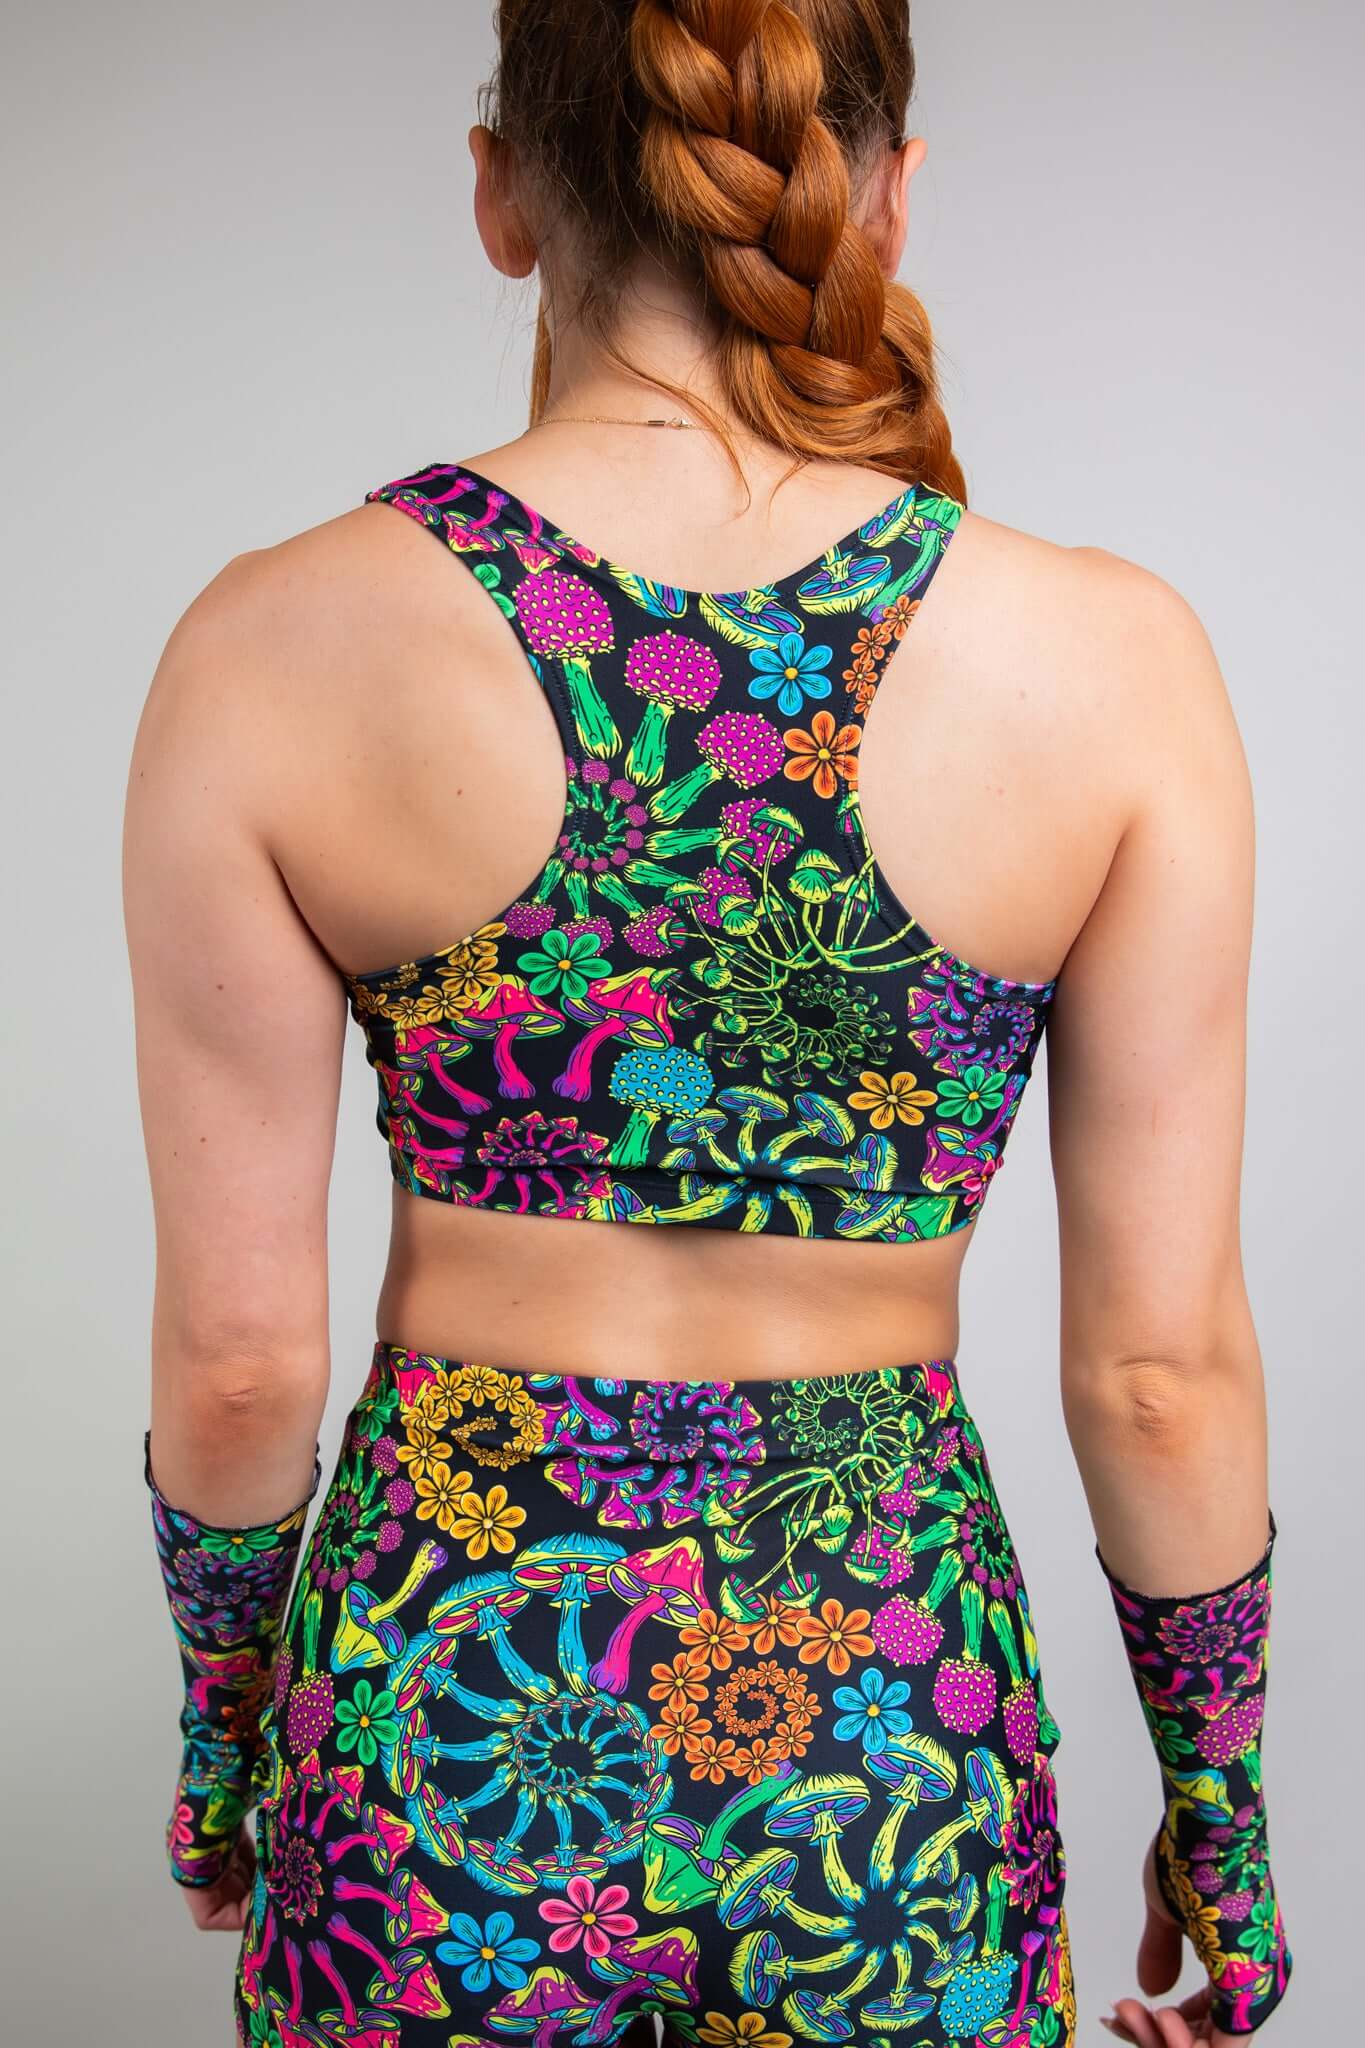 Rear view of a model sporting Freedom Rave Wear's colorful floral racerback top and shorts, highlighting a detailed and vivid print, perfect for standout rave attire.